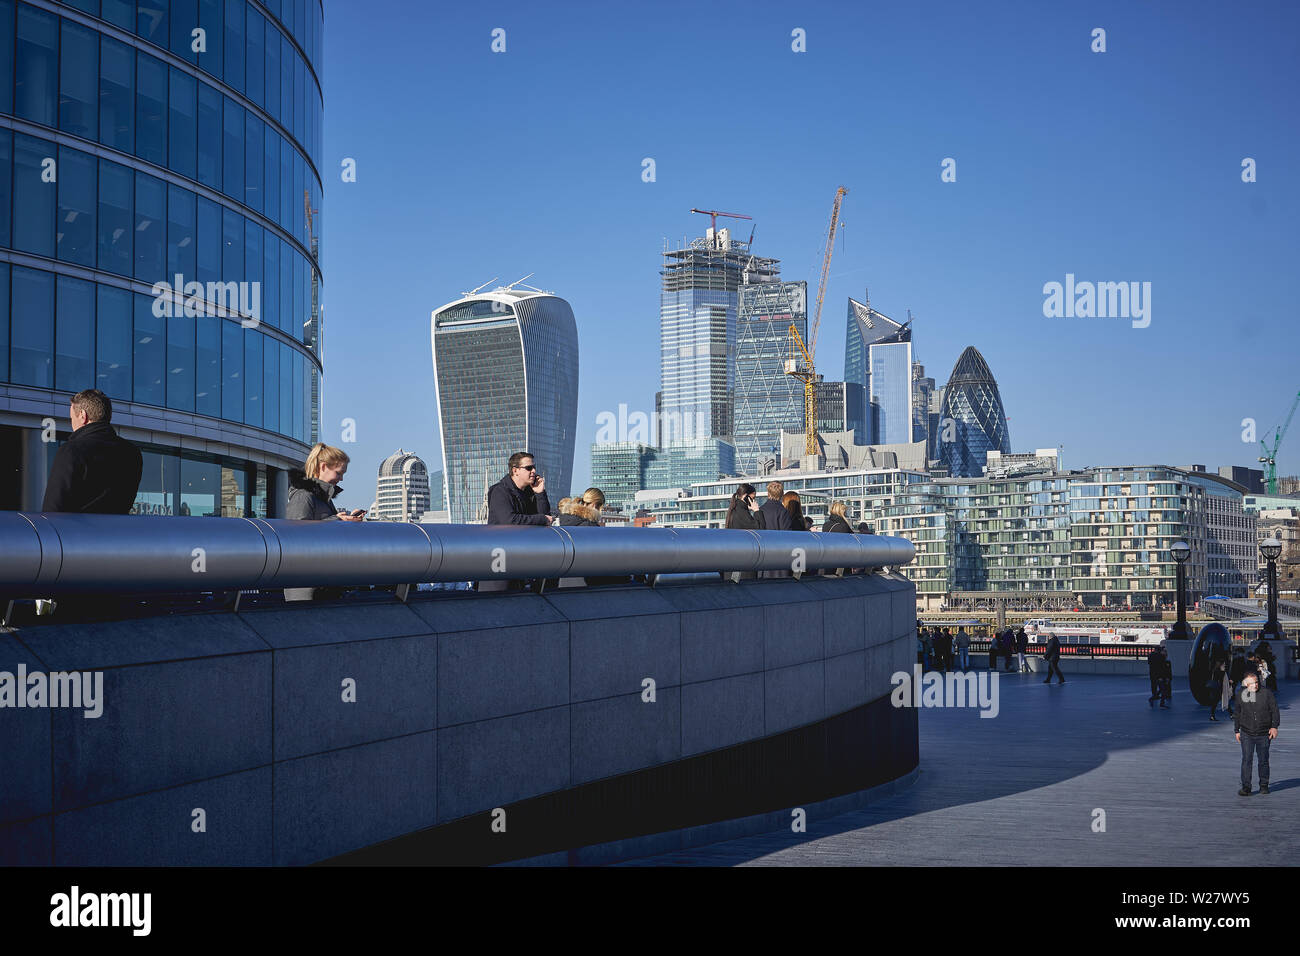 London, UK - February, 2019. View of the City of London, the famous financial district, with new skyscrapers under construction. Stock Photo